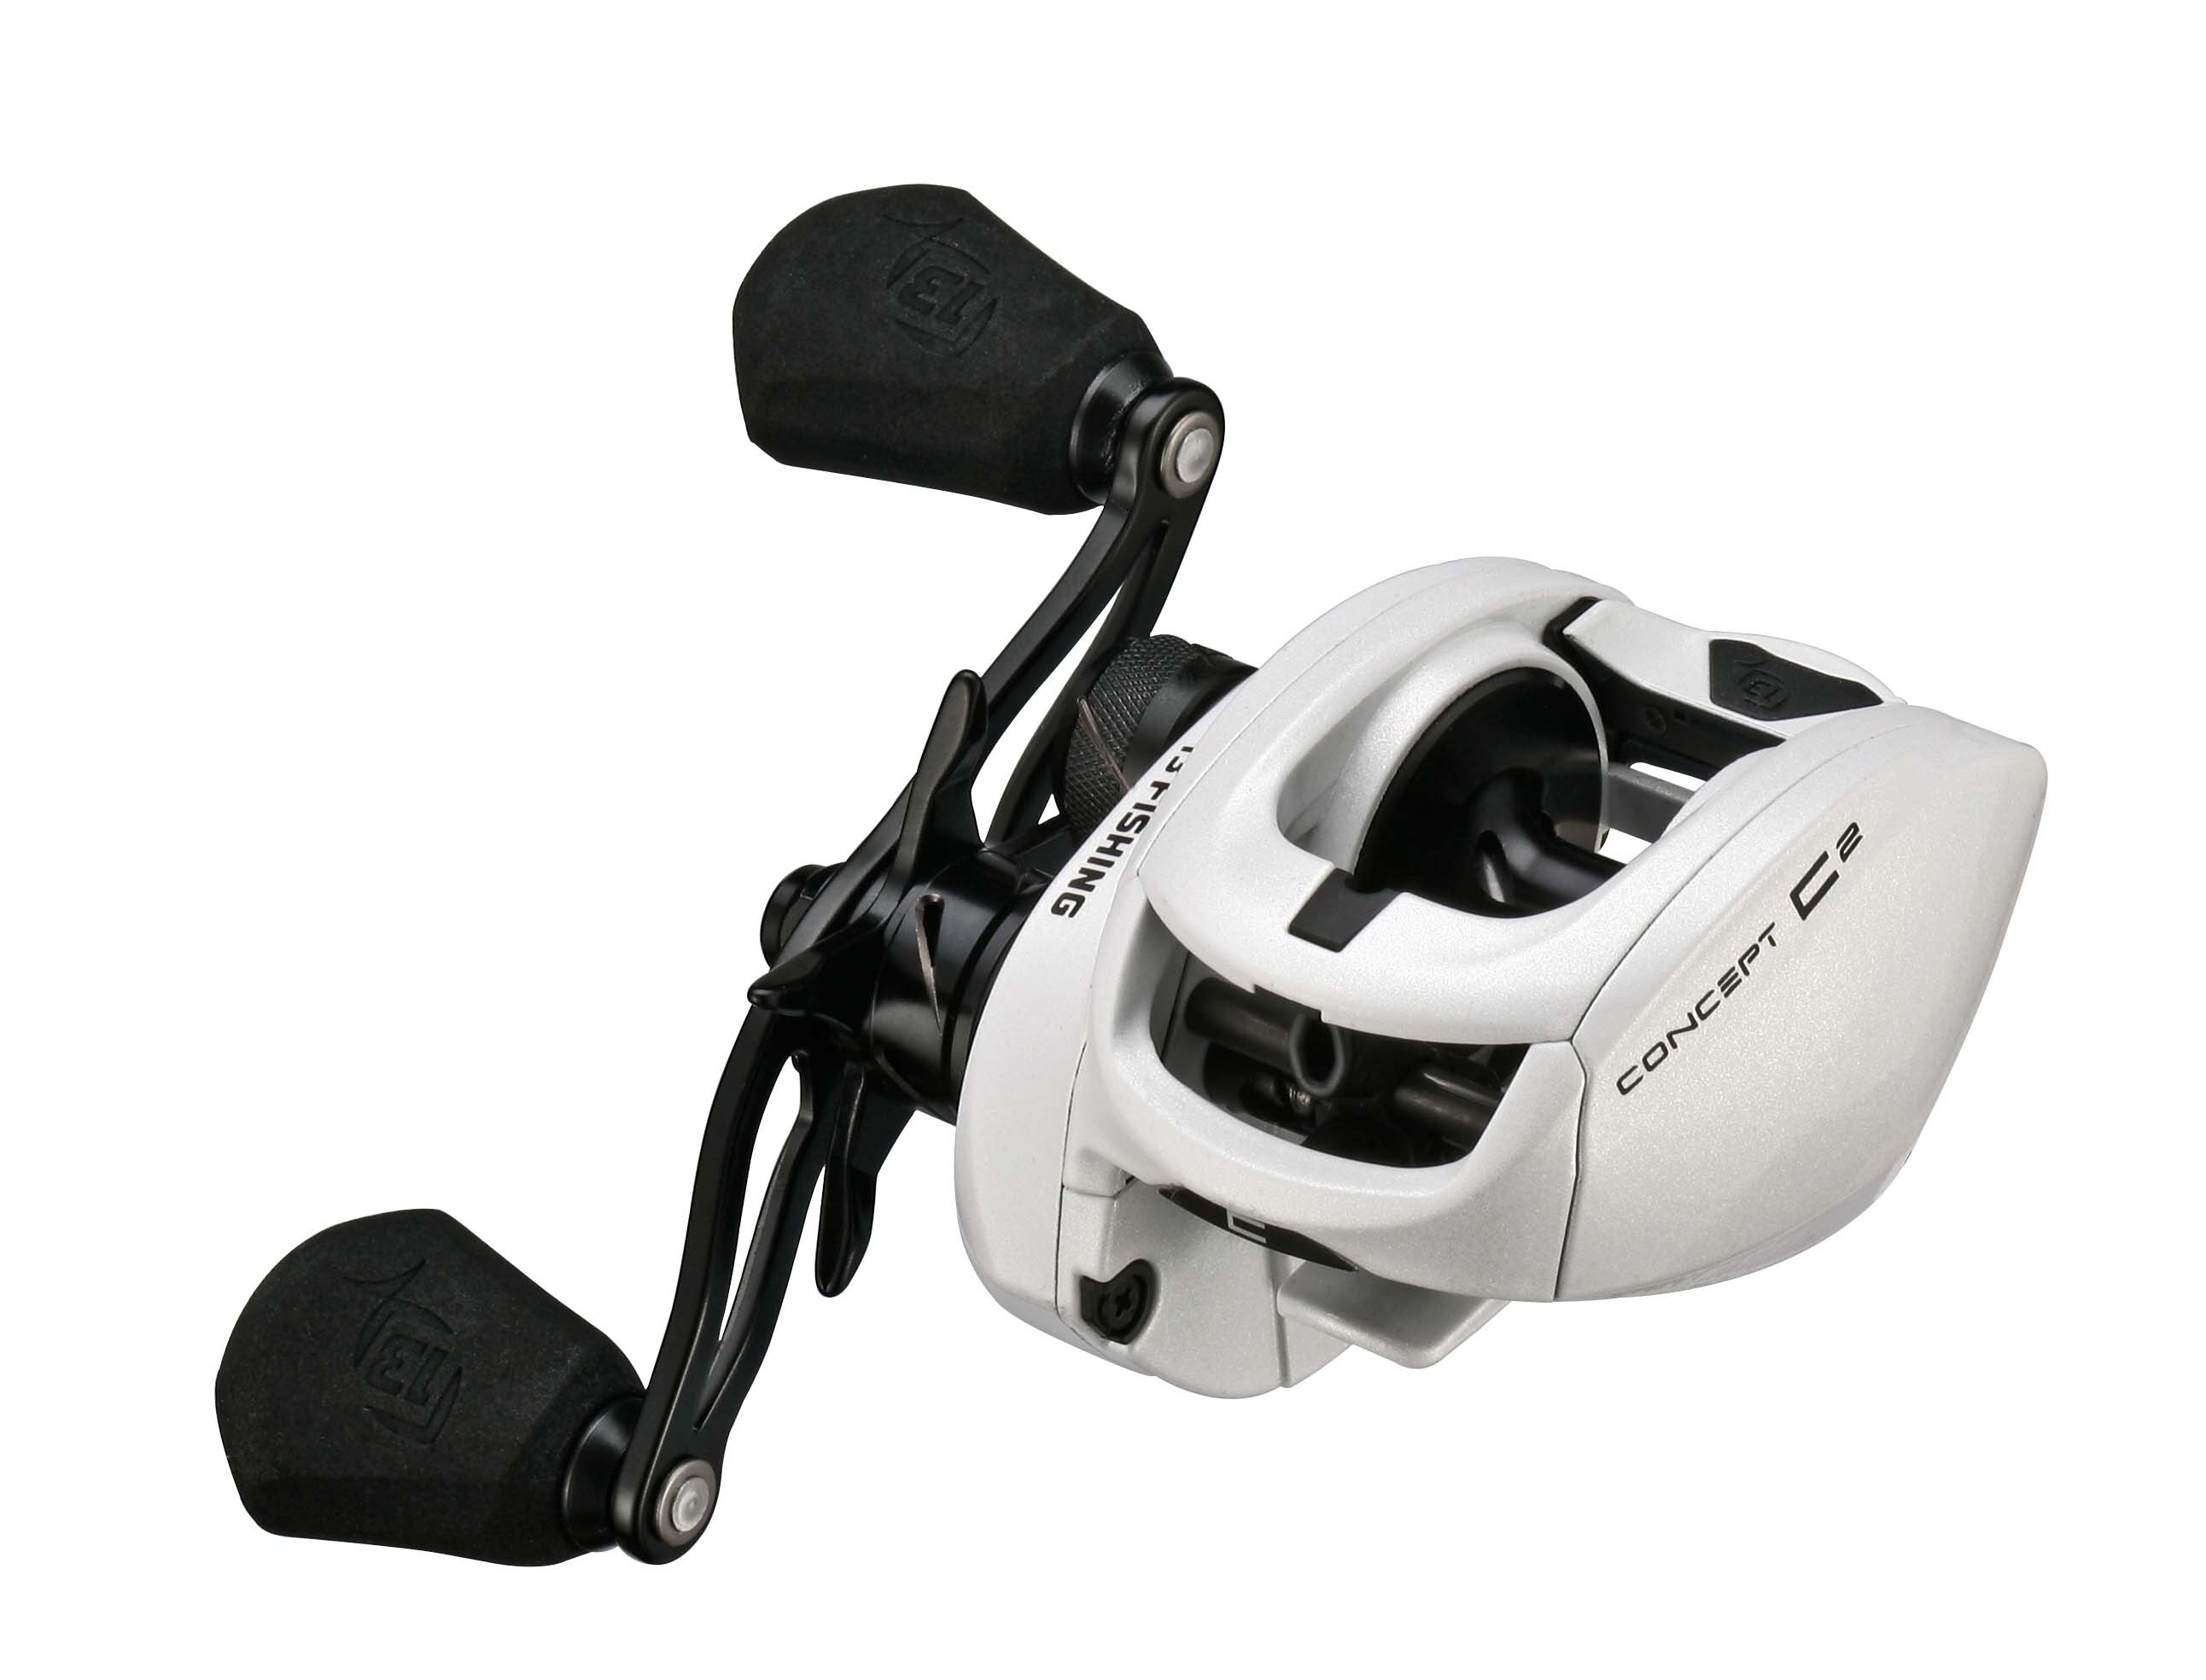 13 Fishing Concept C2 Baitcast Reel 5.6-1 C2-5.6-RH , $20.01 Off with Free  S&H — CampSaver